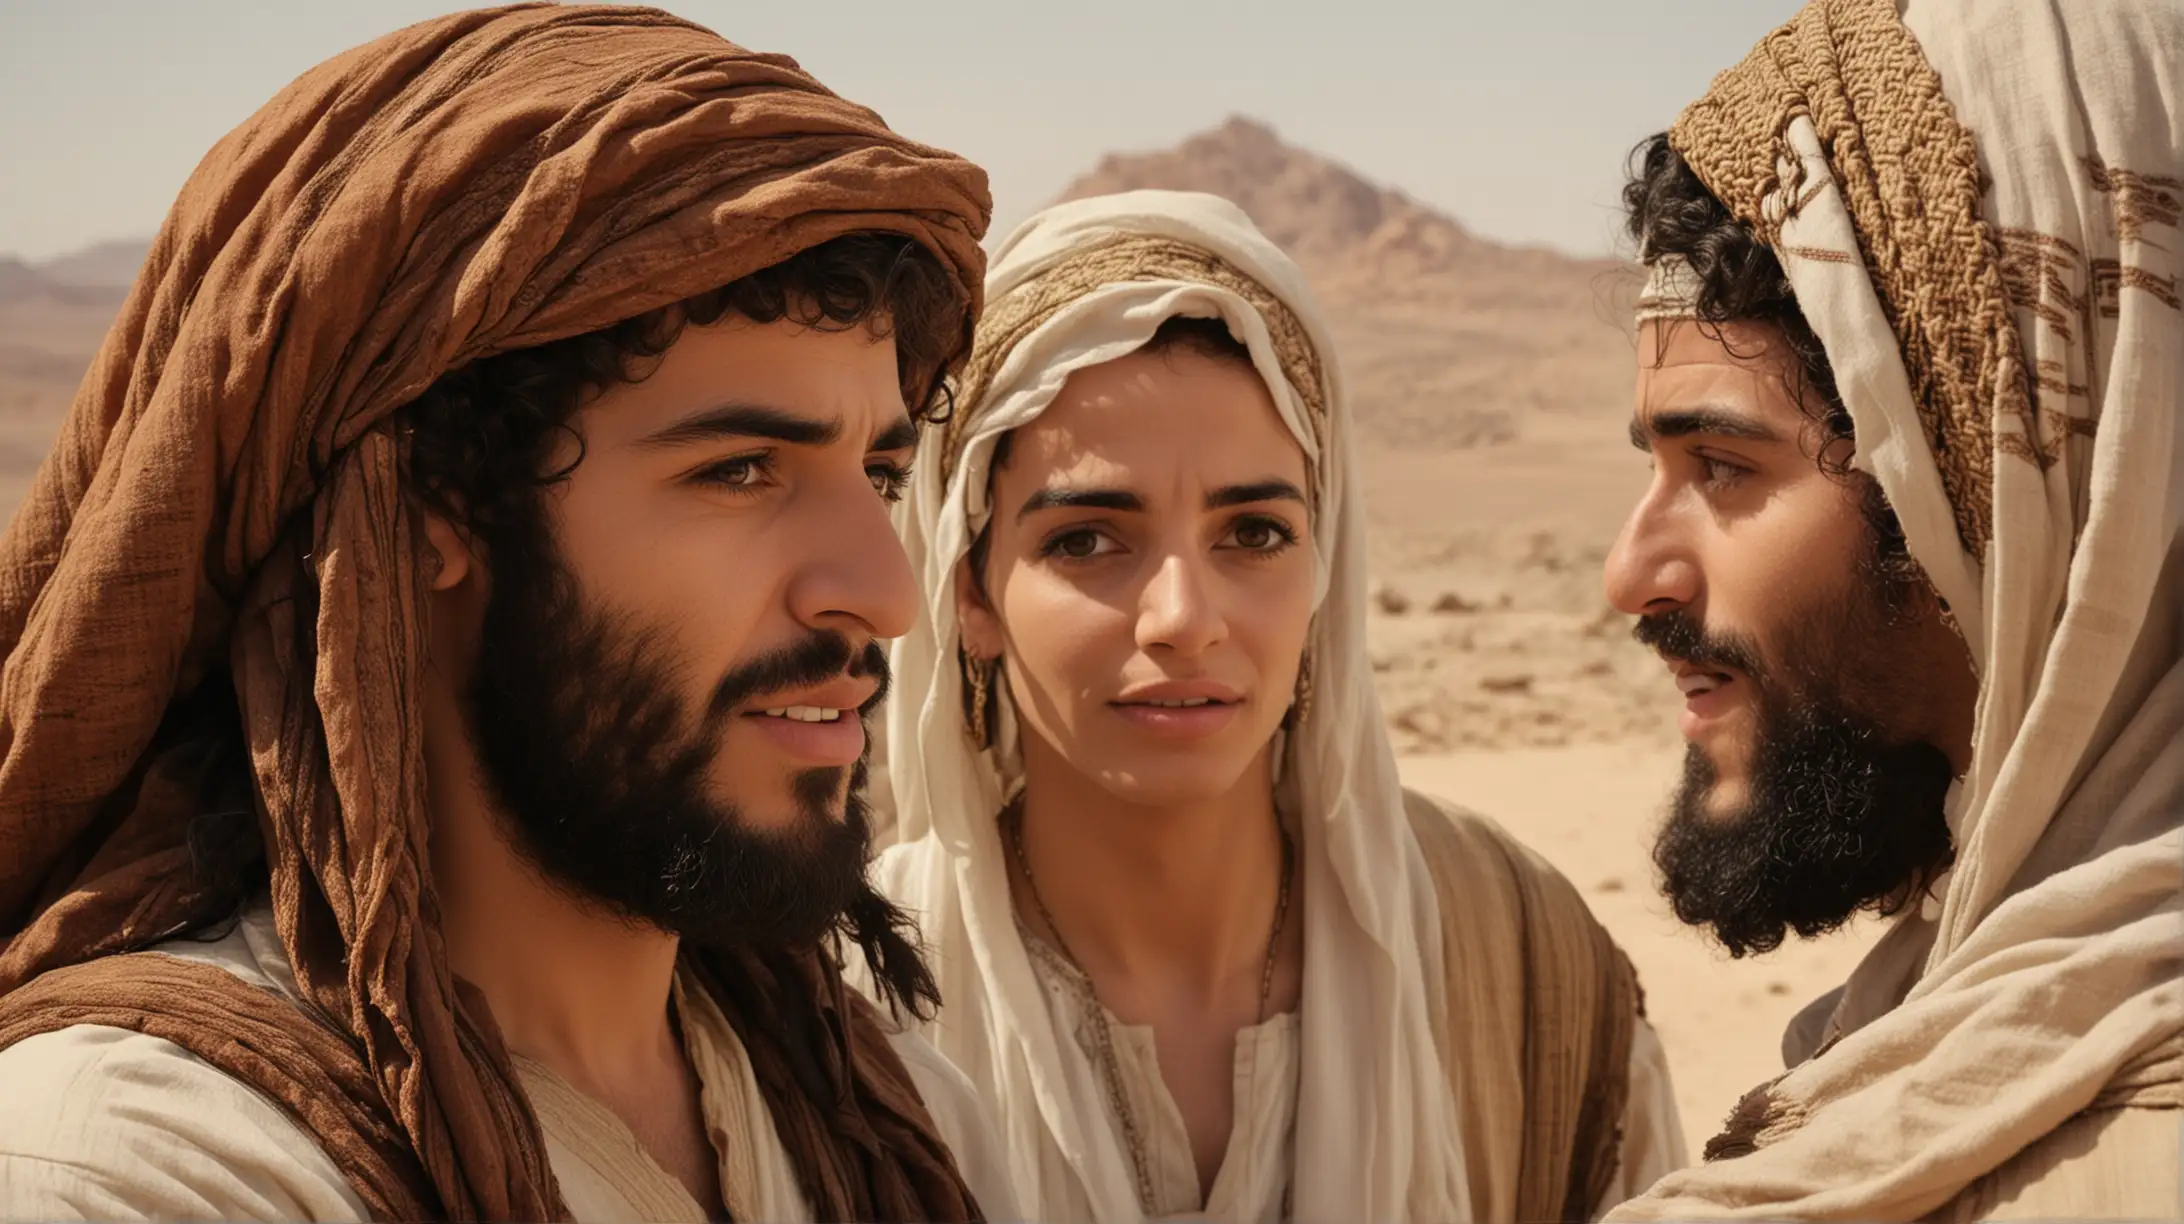 a close up of 2  middle eastern men talking to an attractive woman, in a desert location, during the biblical era of Moses.